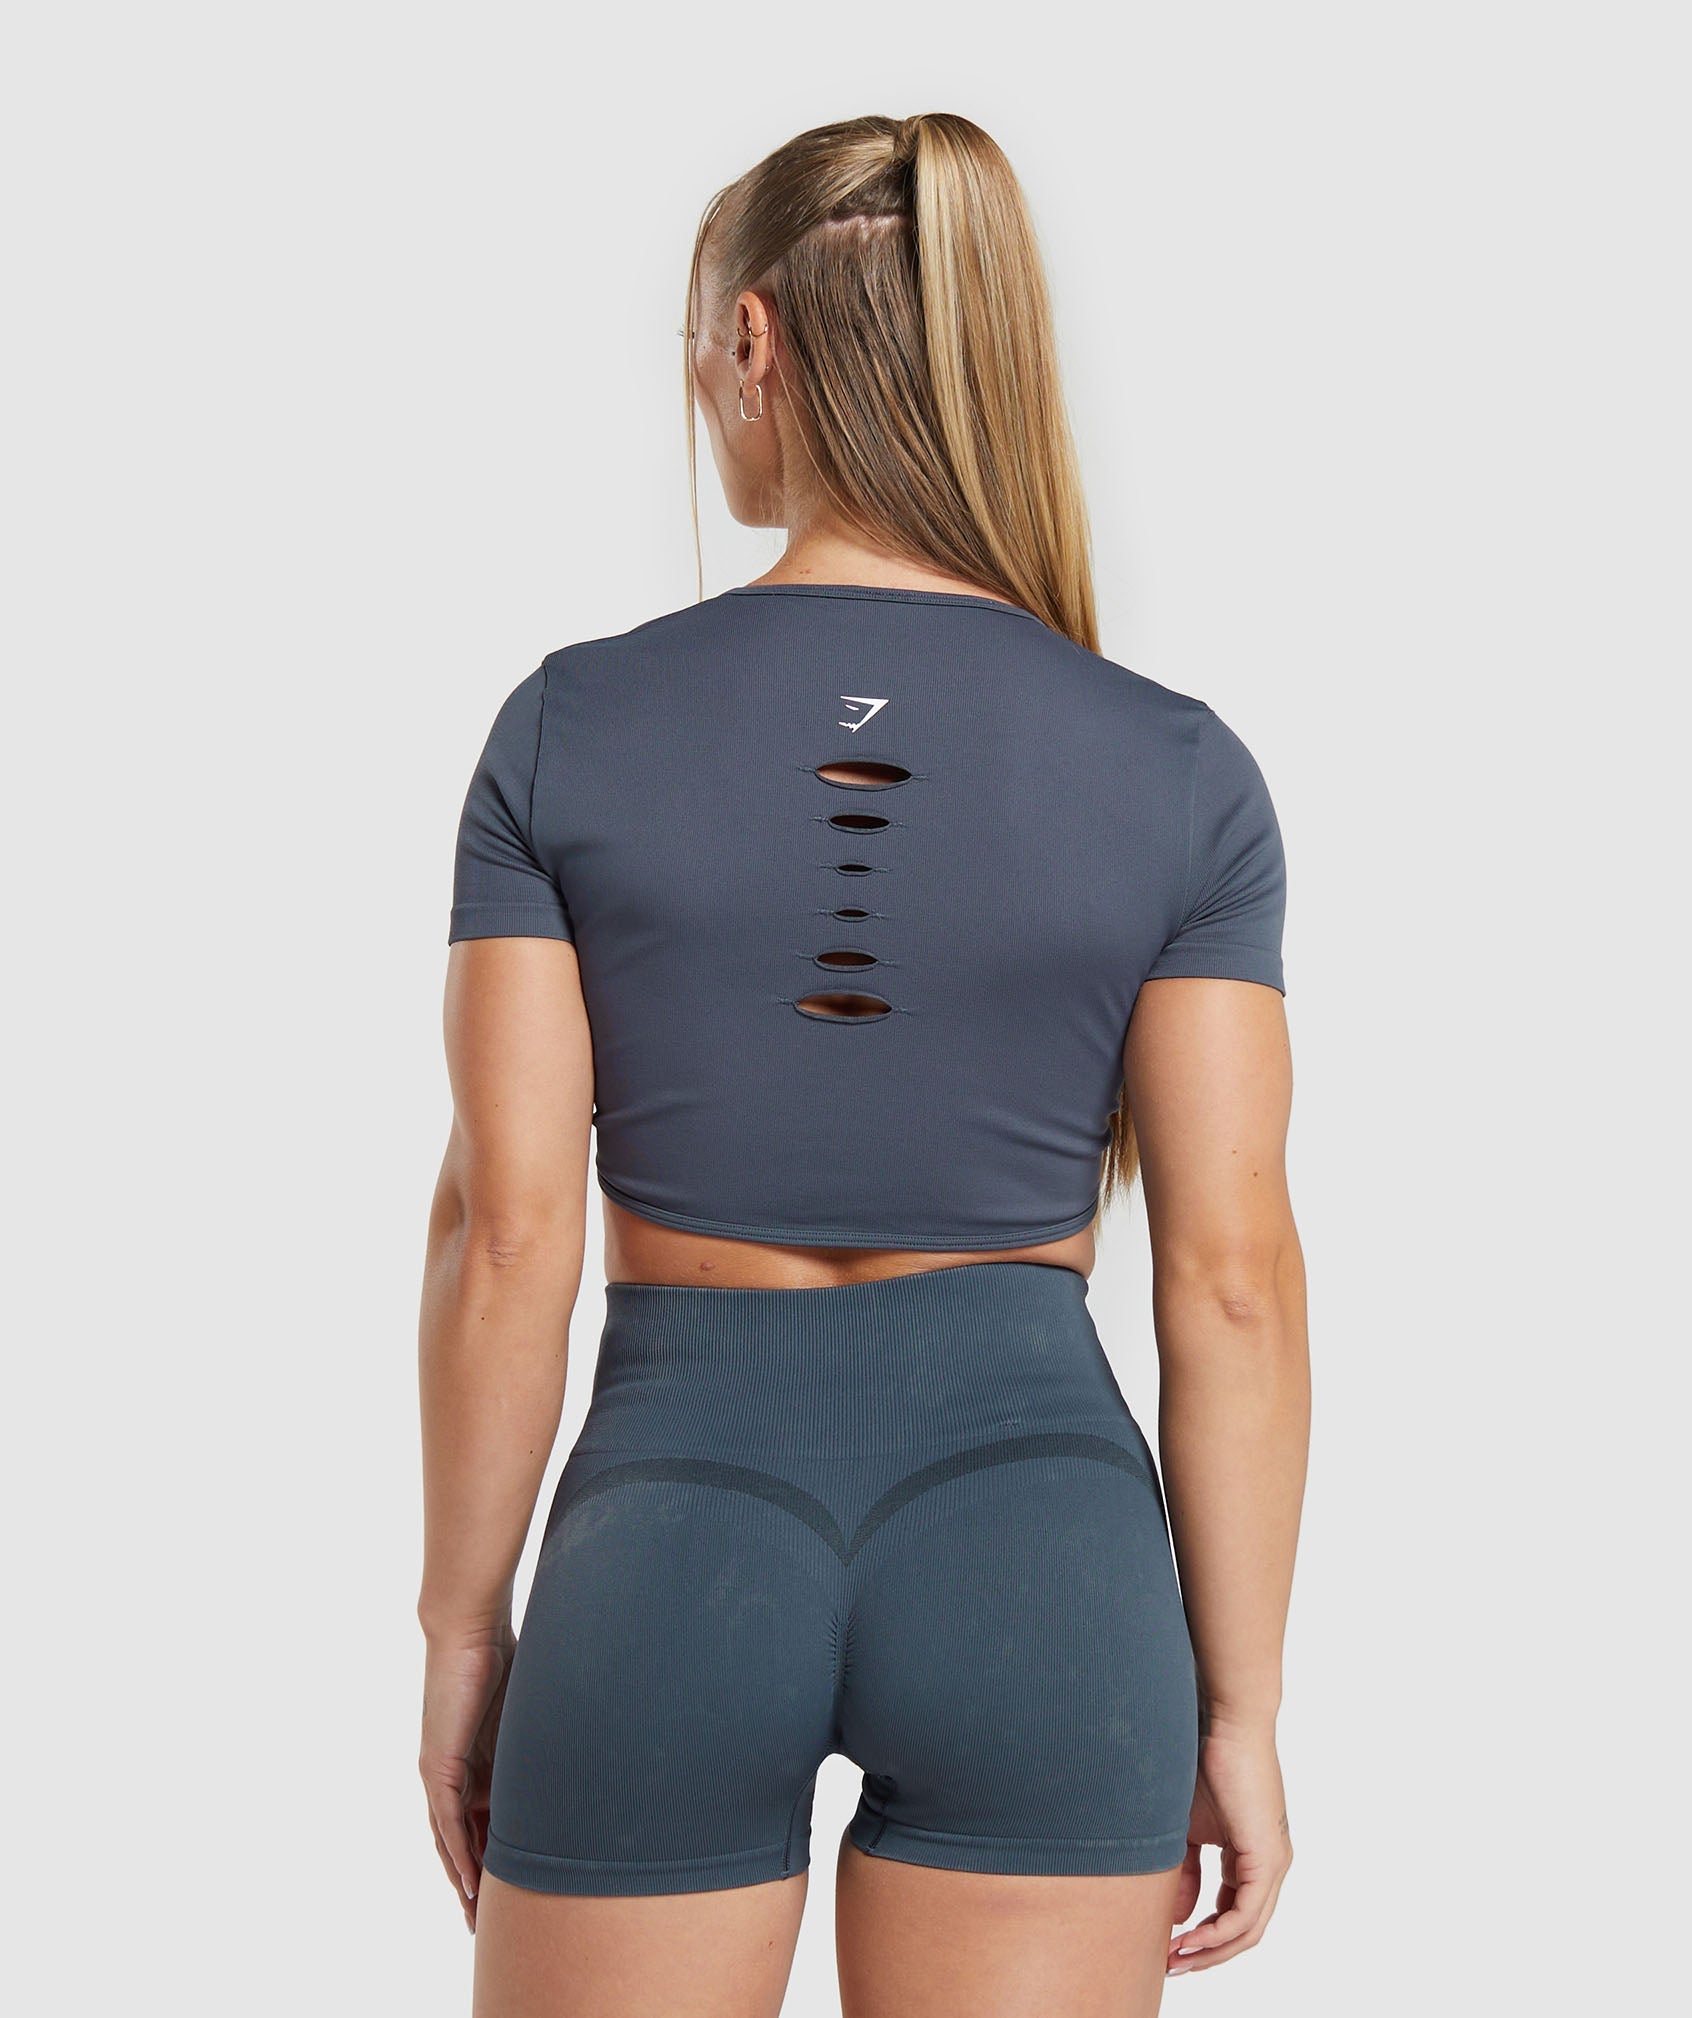 Gains Seamless Fitted Crop Top in Titanium Blue - view 2